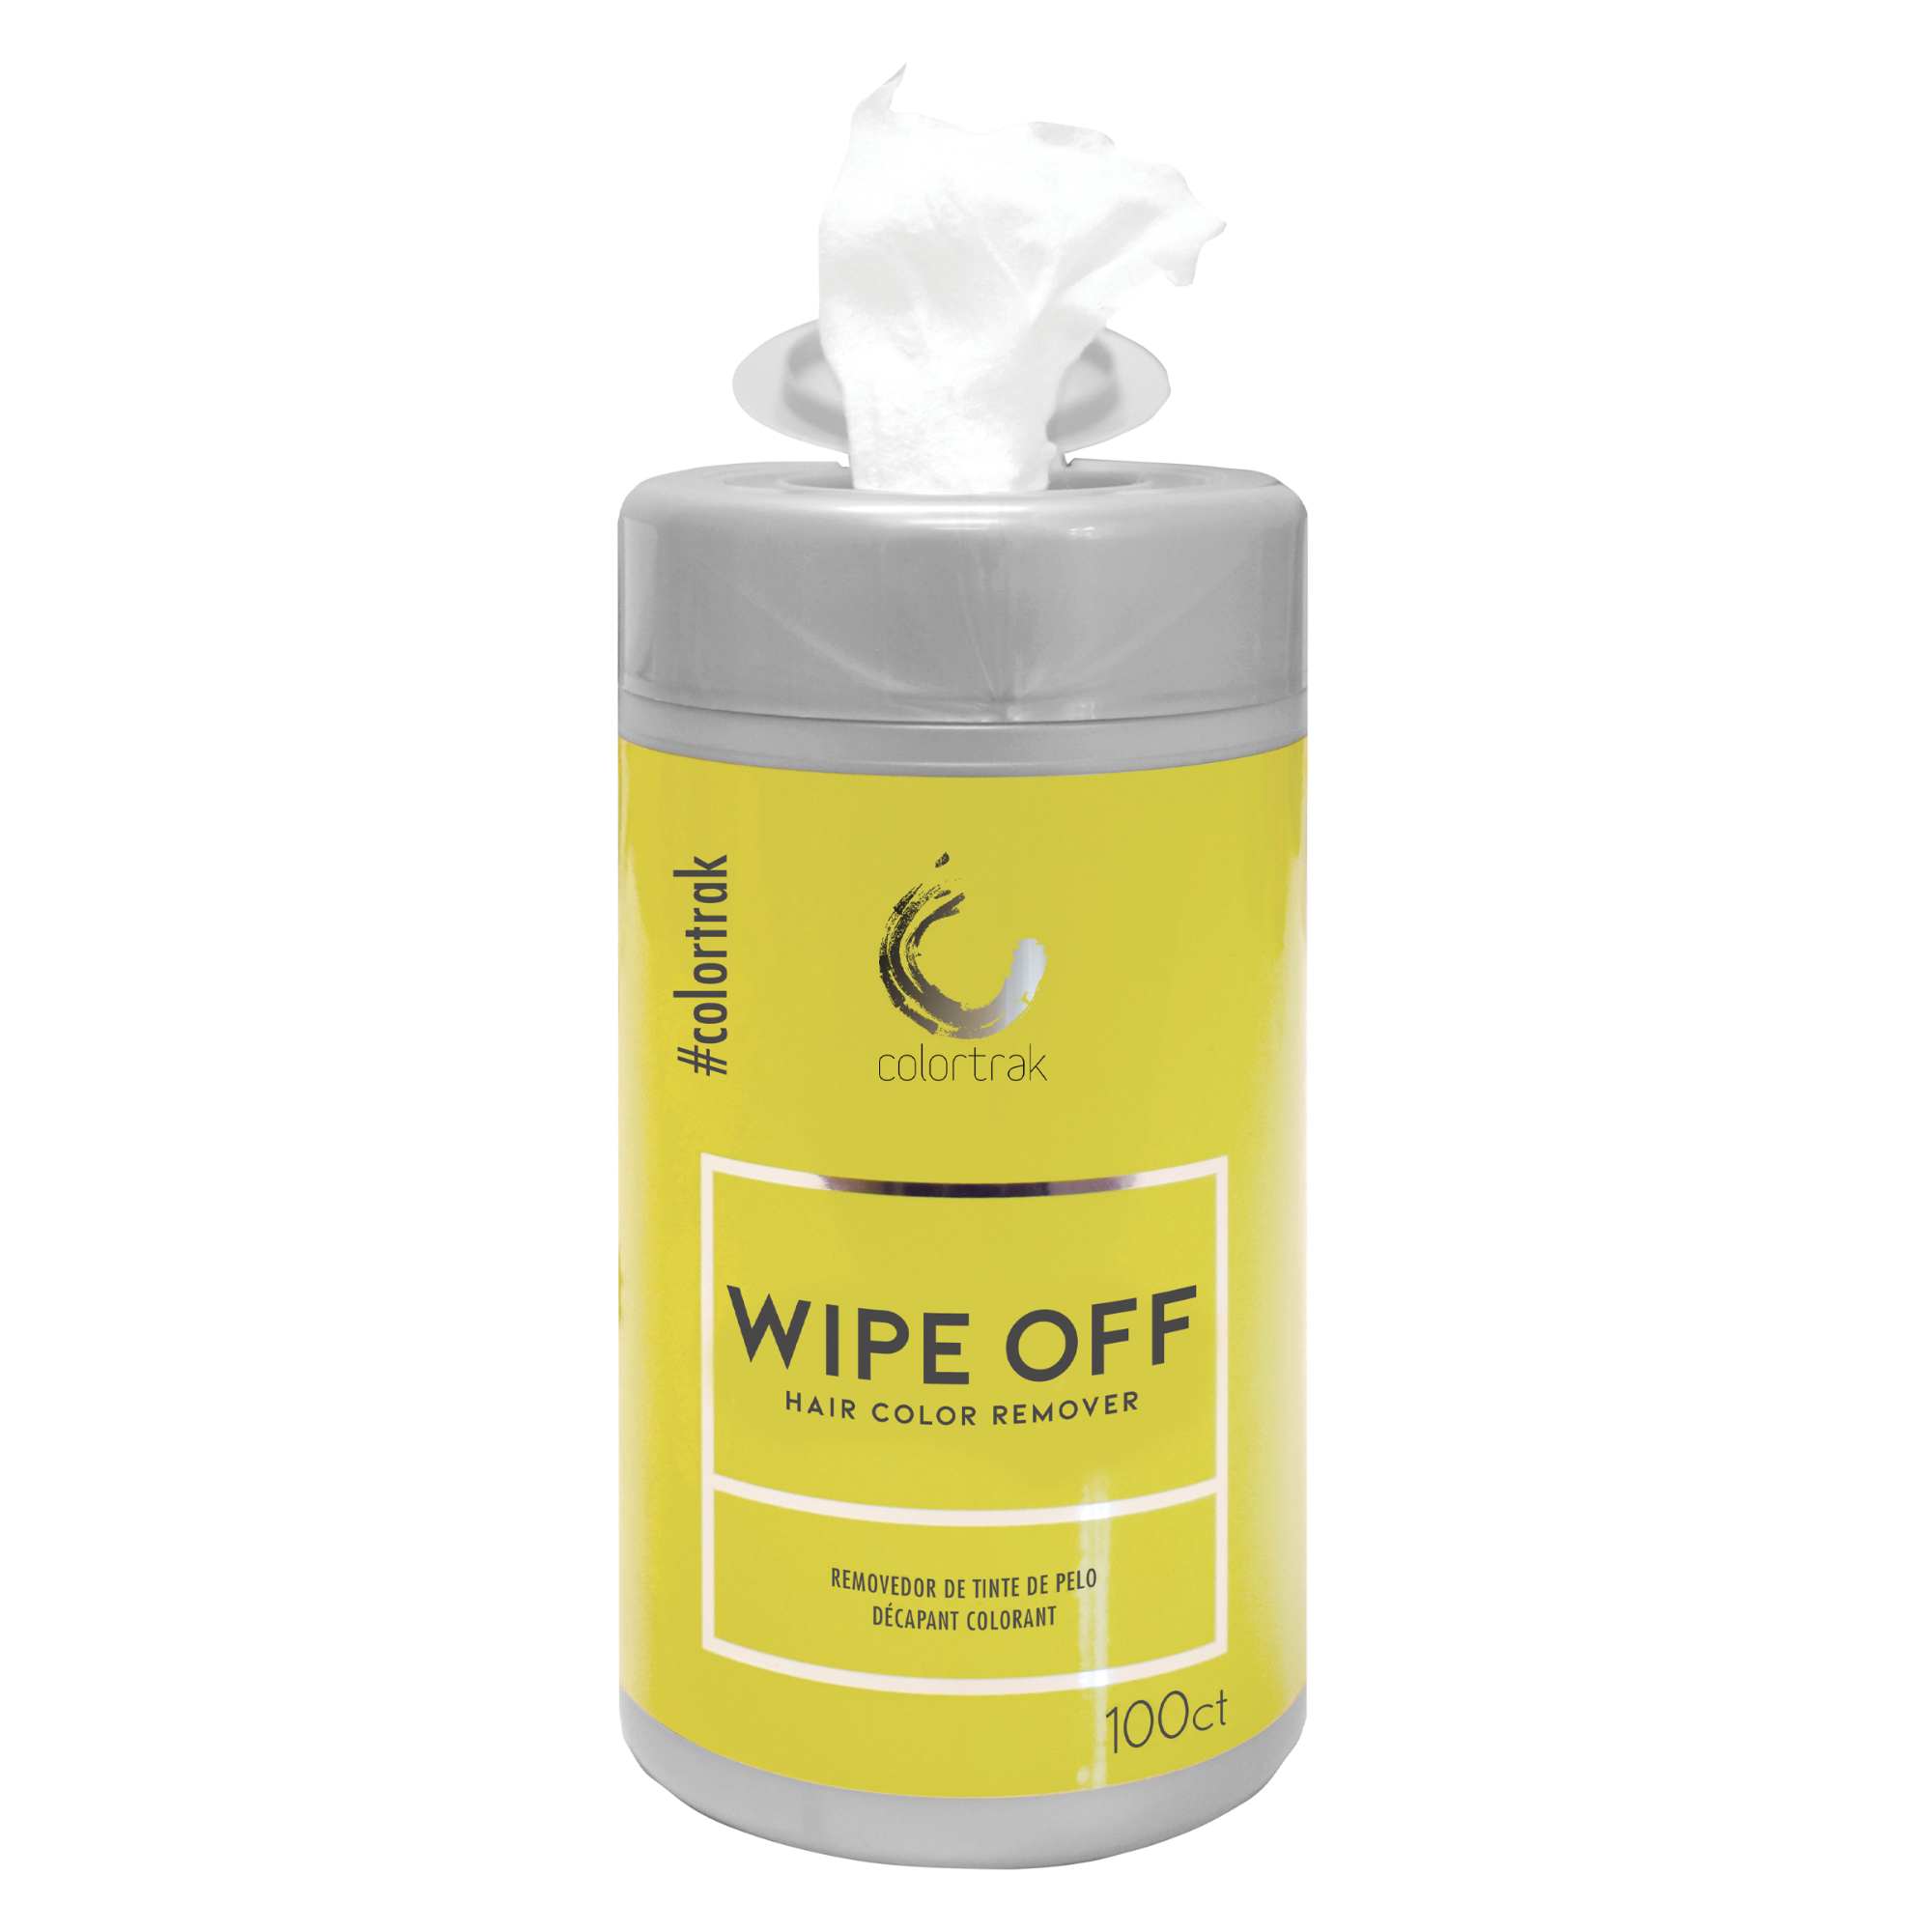 Wipe Off Hair Color Remover Wipes - 100 ct.